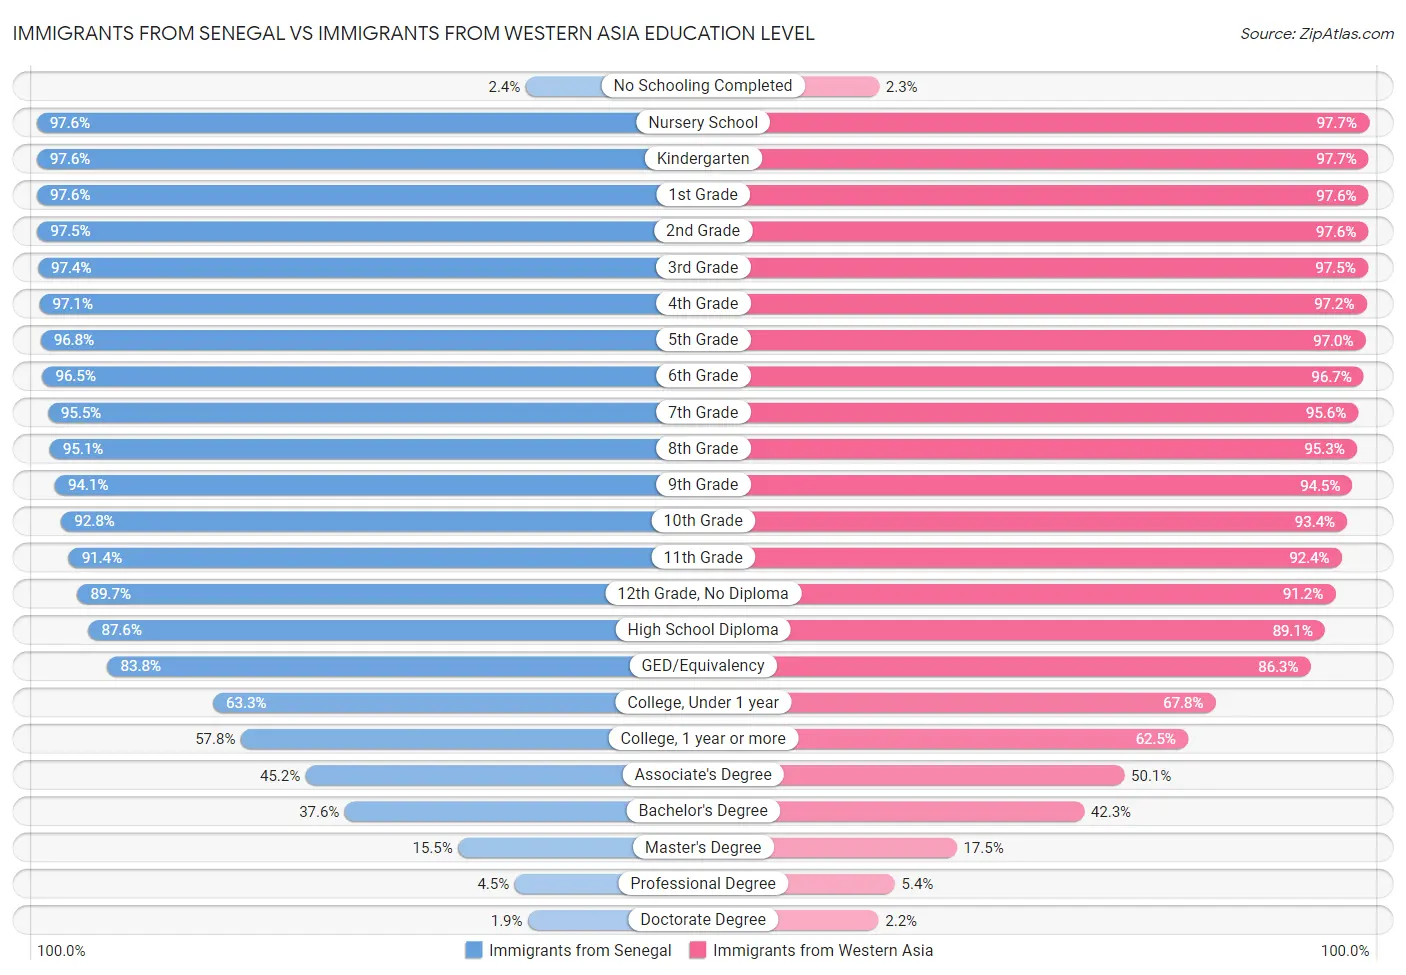 Immigrants from Senegal vs Immigrants from Western Asia Education Level